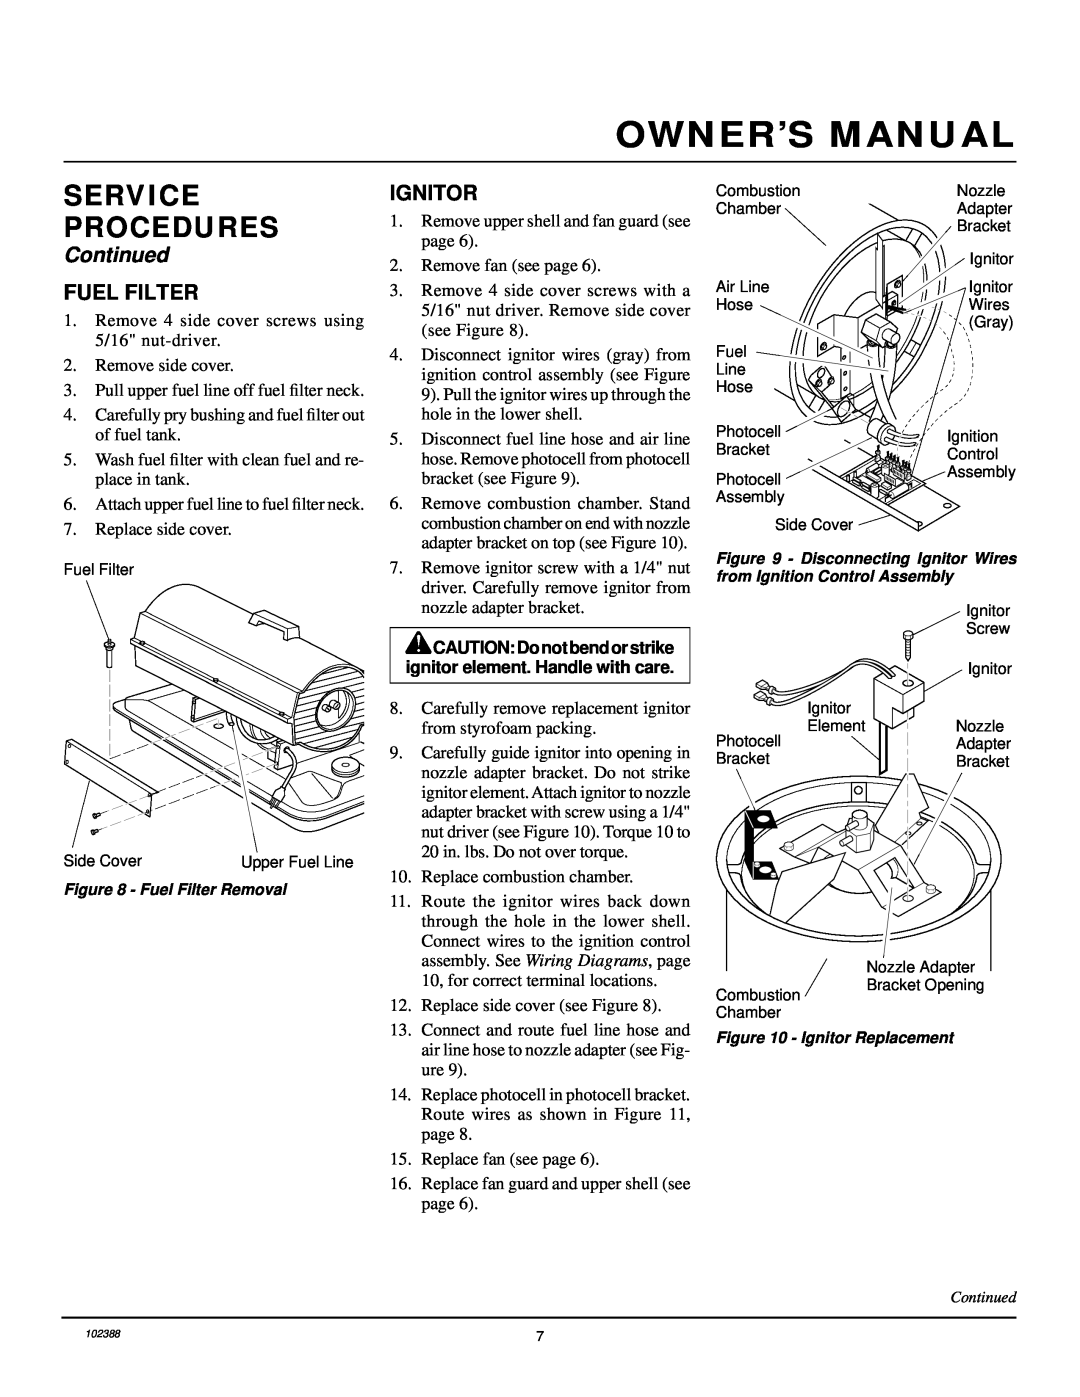 Desa and 55 owner manual Continued, Fuel Filter, Ignitor, Service Procedures 